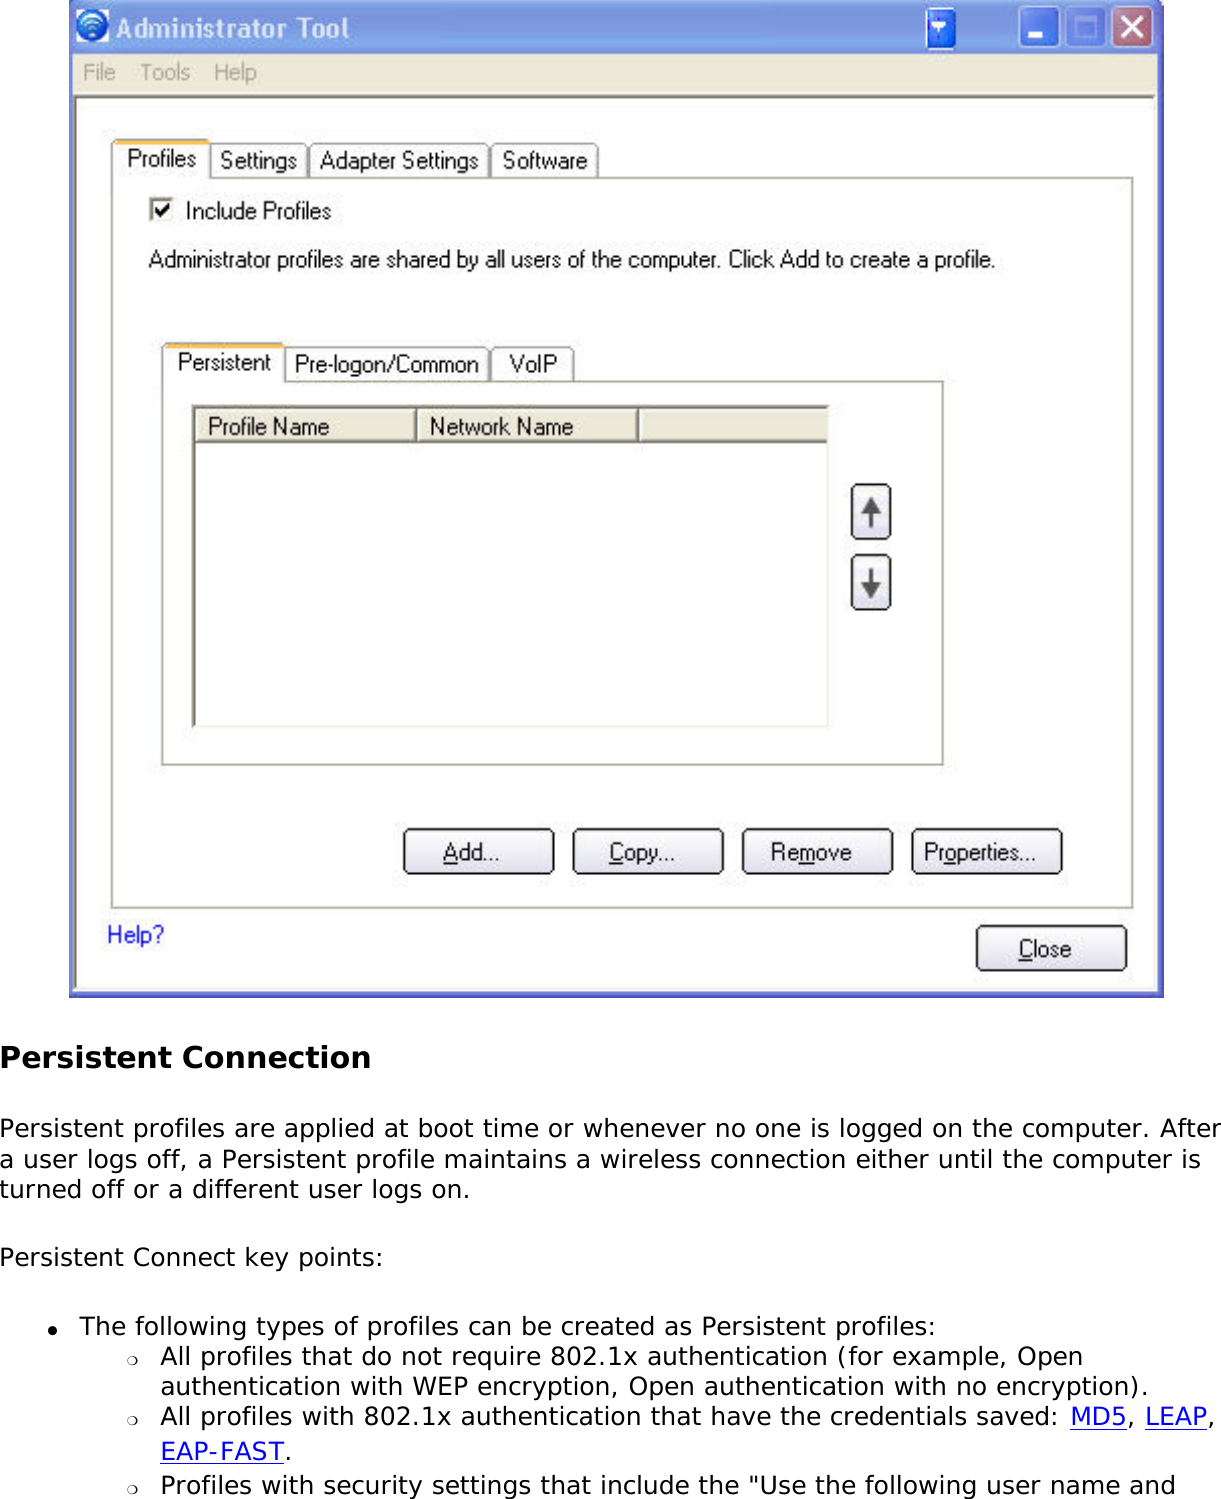  Persistent Connection Persistent profiles are applied at boot time or whenever no one is logged on the computer. After a user logs off, a Persistent profile maintains a wireless connection either until the computer is turned off or a different user logs on. Persistent Connect key points: ●     The following types of profiles can be created as Persistent profiles: ❍     All profiles that do not require 802.1x authentication (for example, Open authentication with WEP encryption, Open authentication with no encryption).❍     All profiles with 802.1x authentication that have the credentials saved: MD5, LEAP, EAP-FAST. ❍     Profiles with security settings that include the &quot;Use the following user name and 